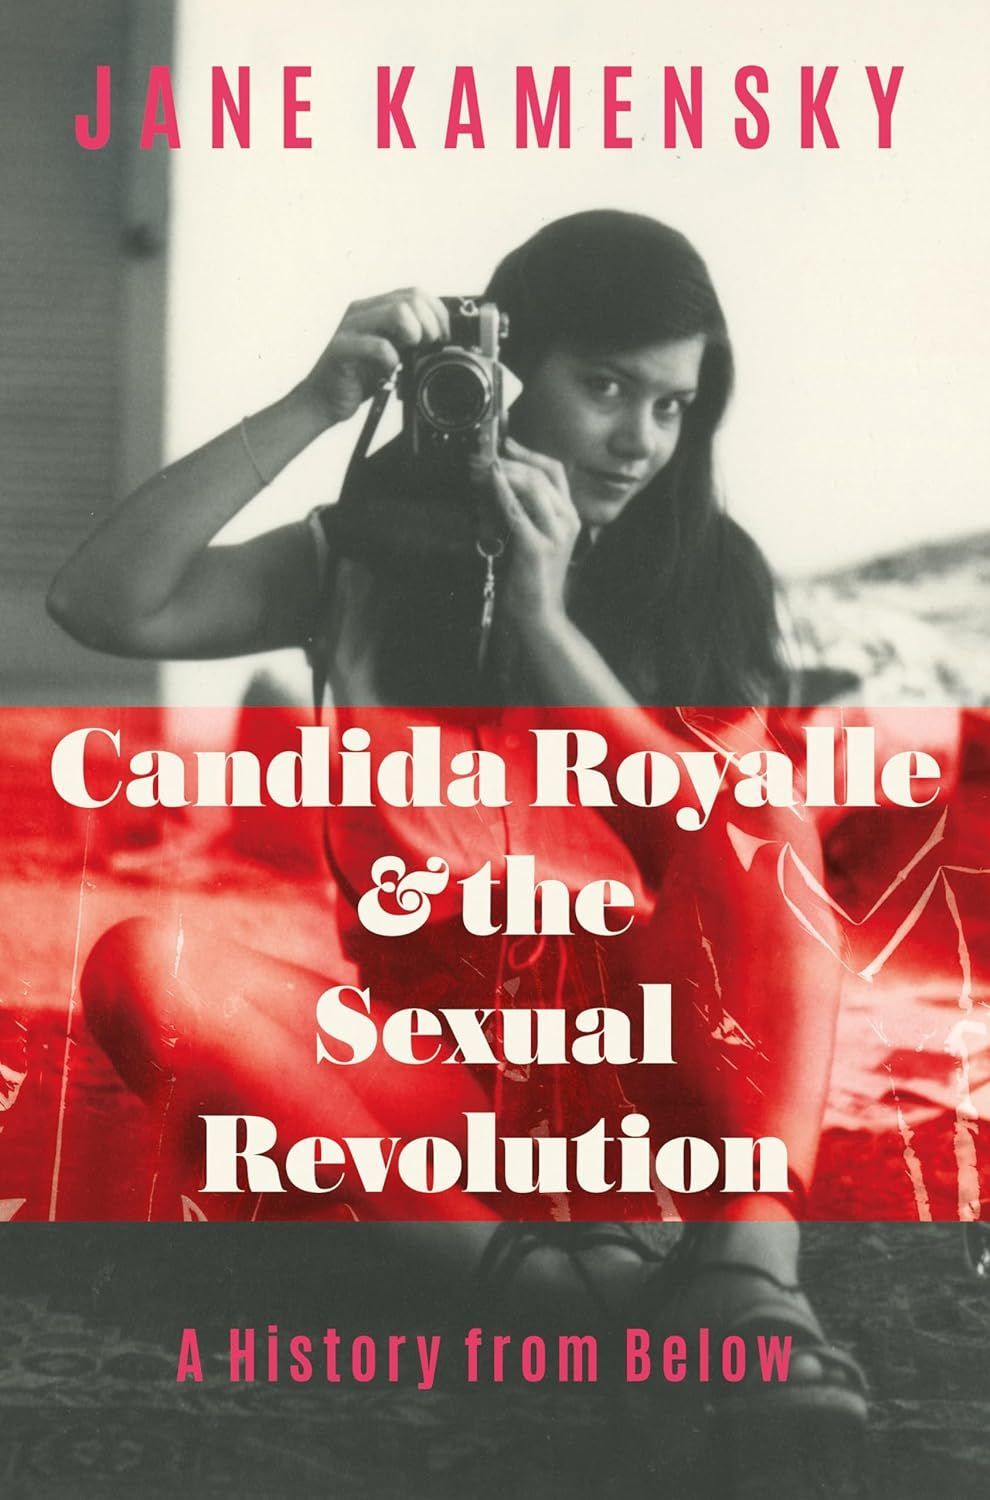 Porn Star and Feminist: On Jane Kamensky’s “Candida Royalle and the Sexual Revolution”